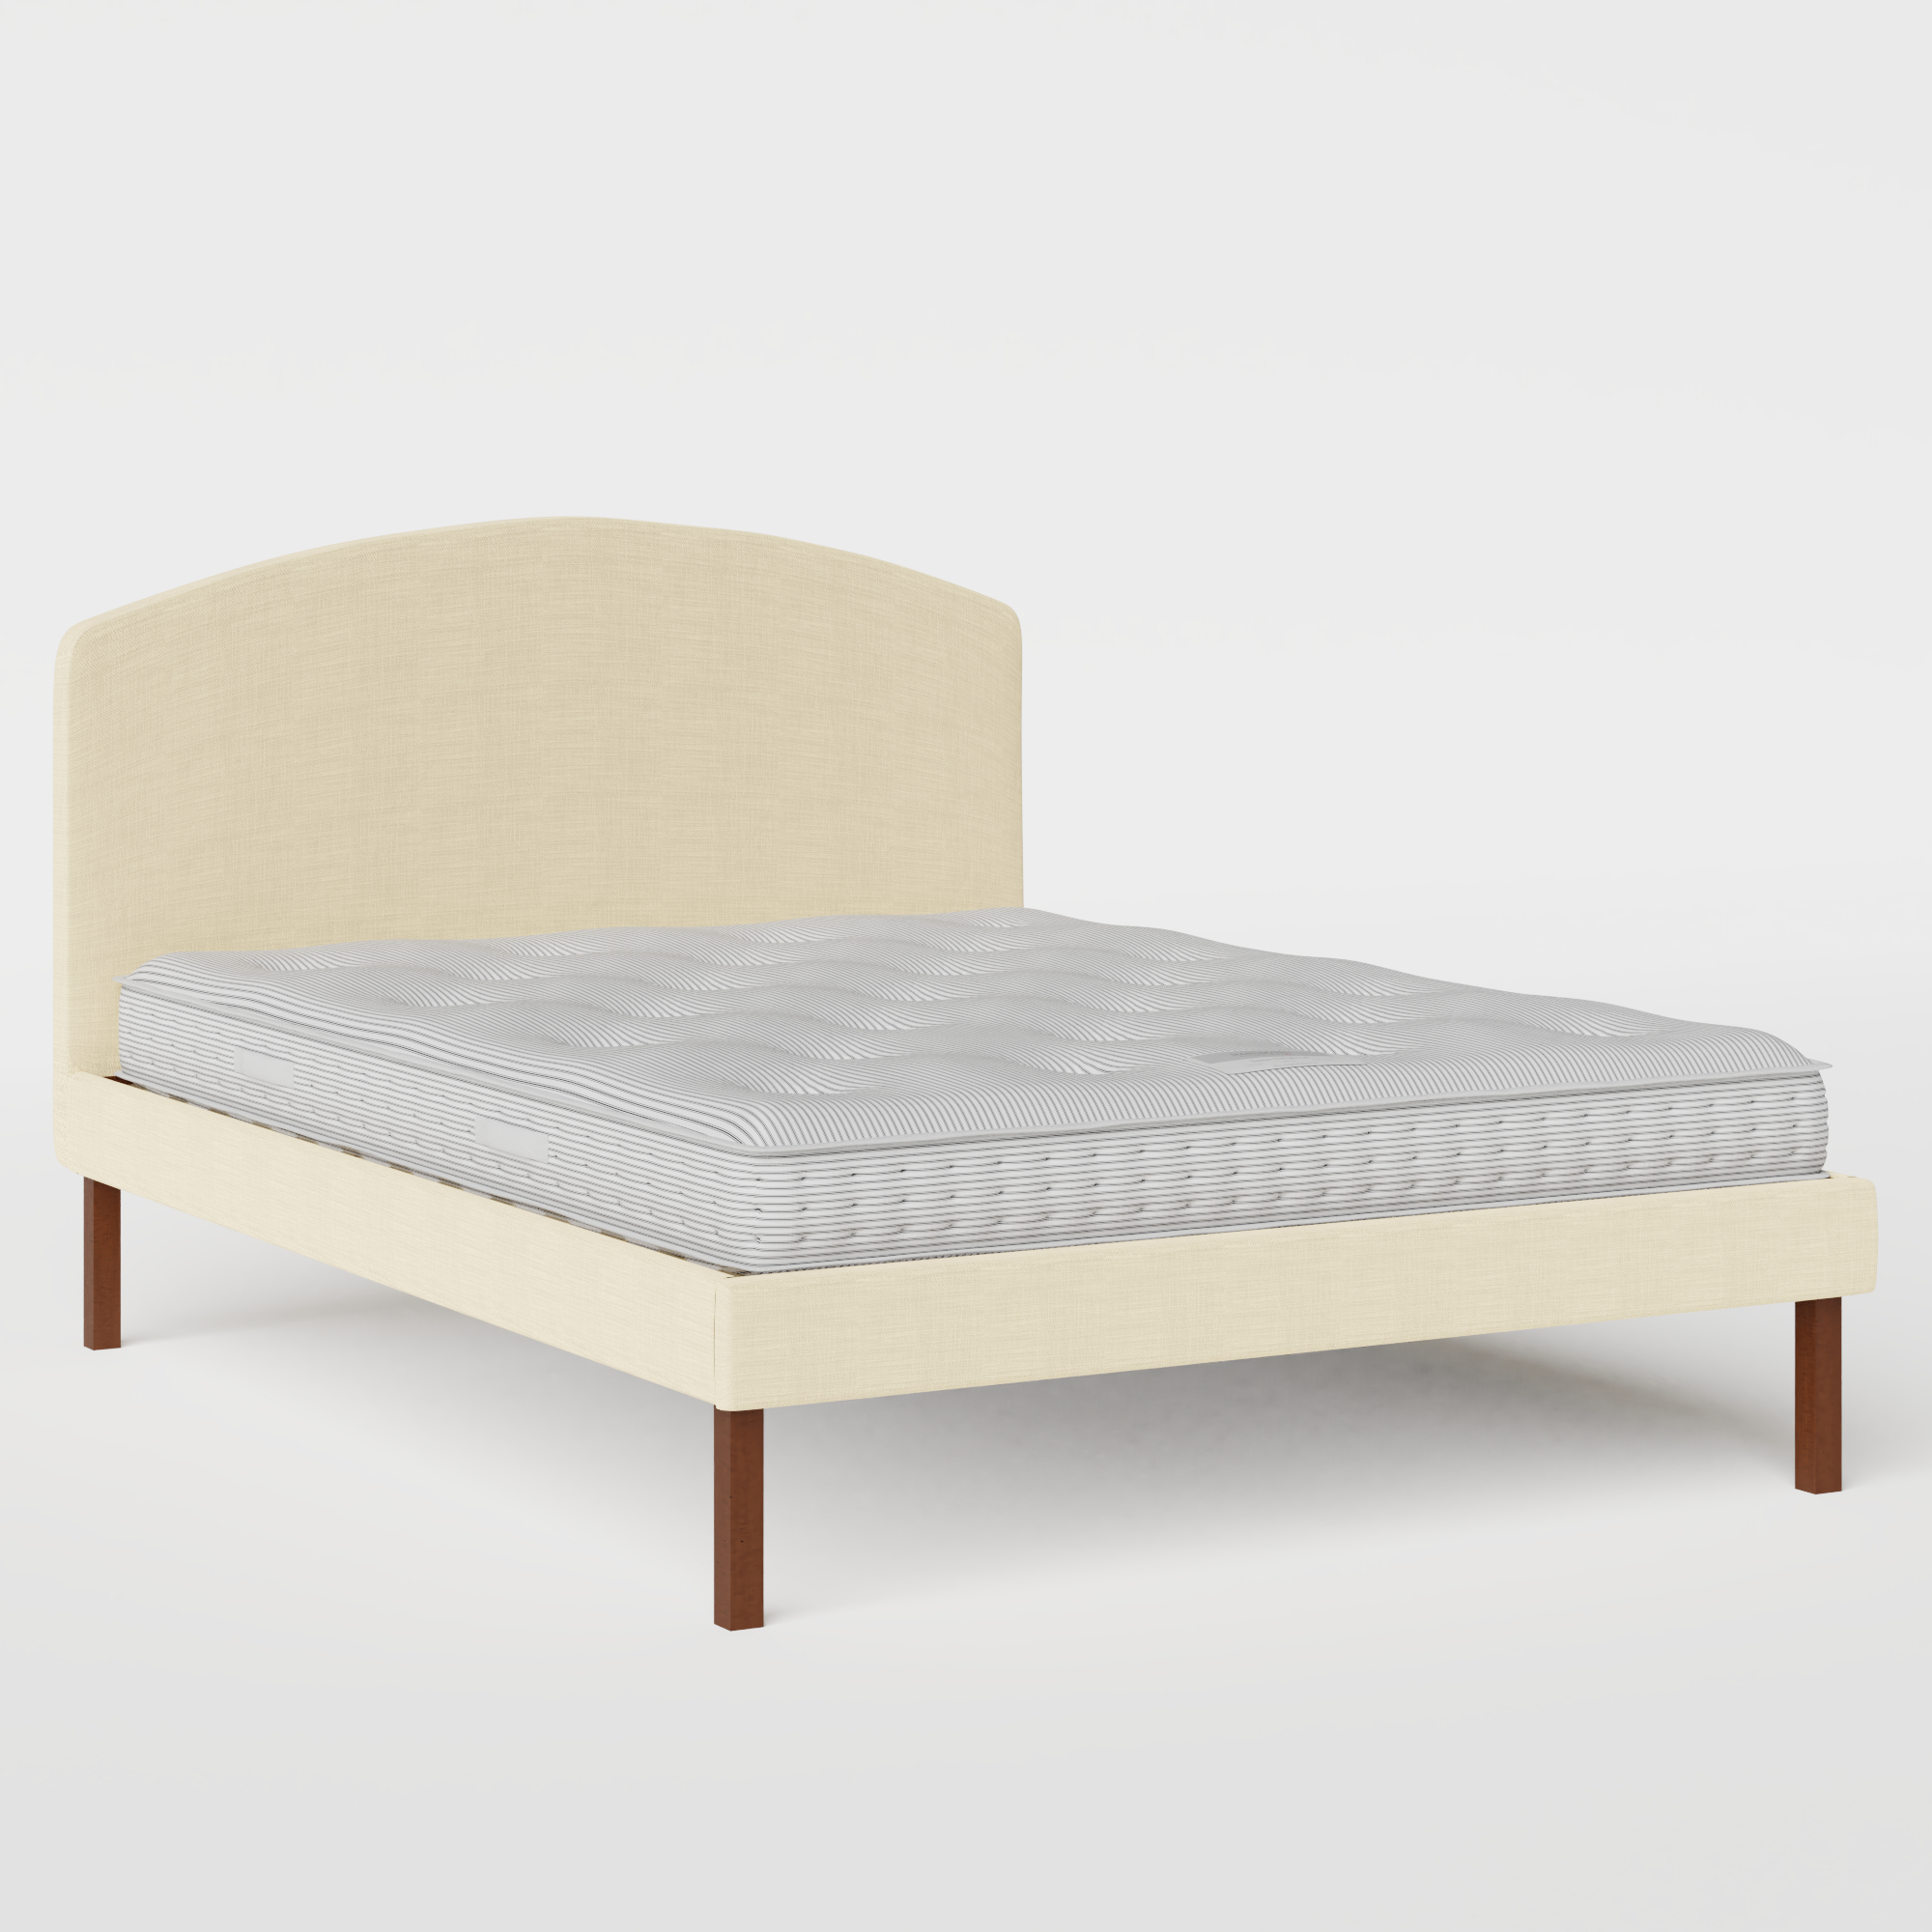 Okawa Upholstered stoffen bed in natural